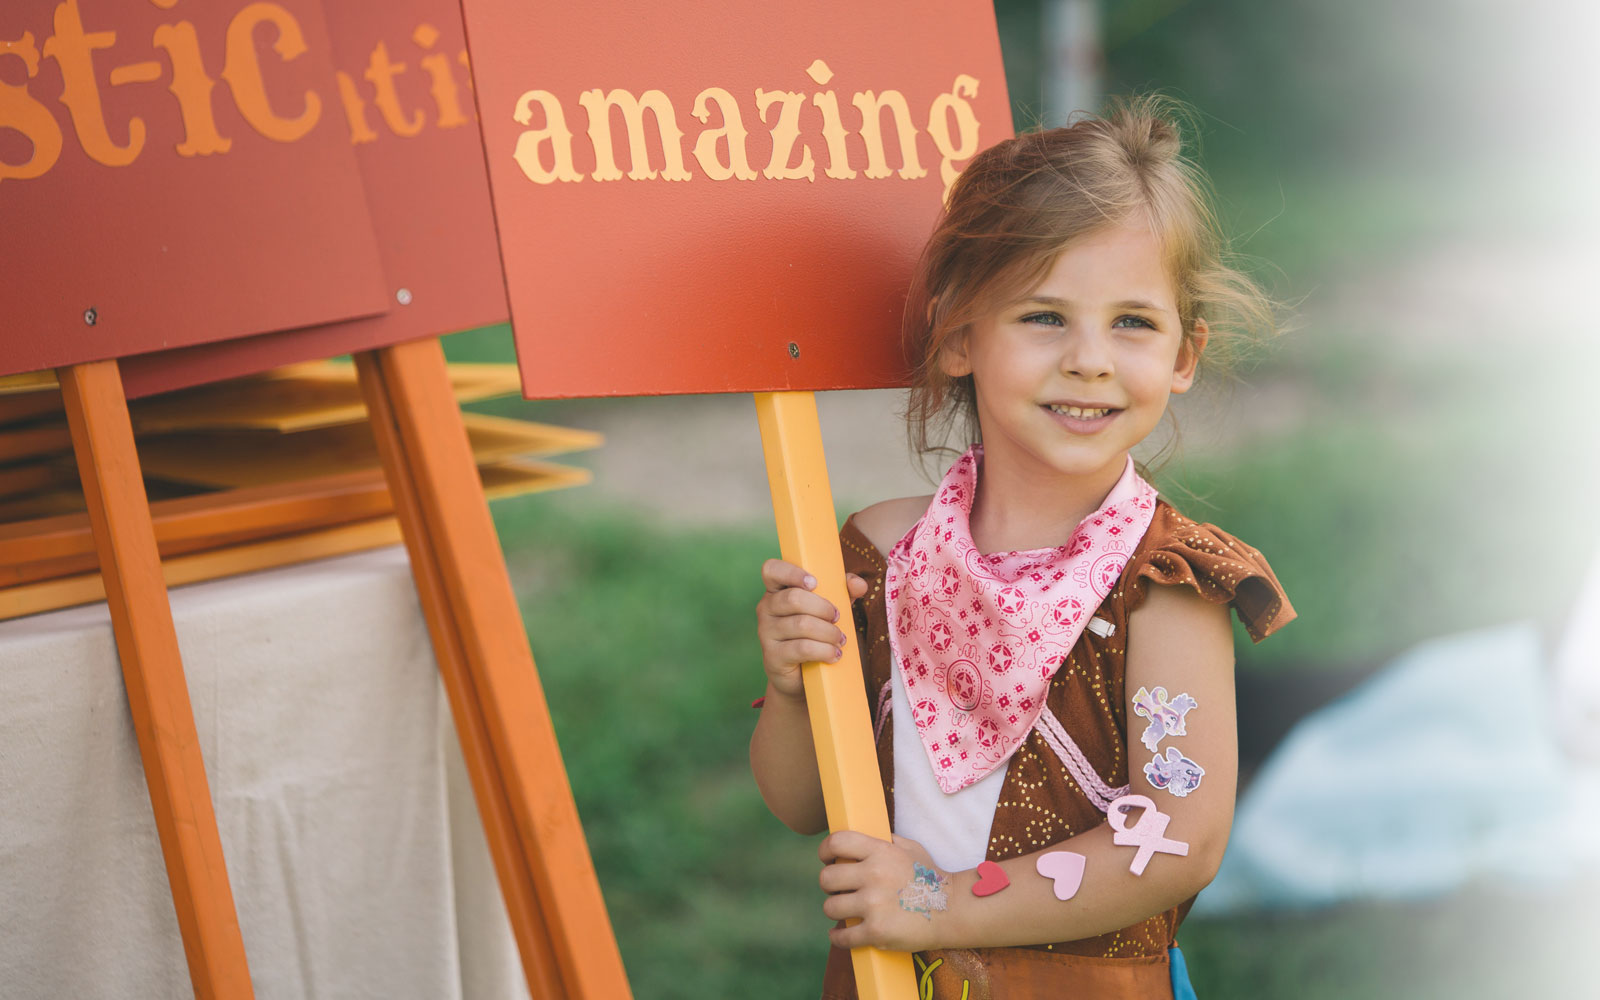 A young girl holding a sign that reads "amazing."